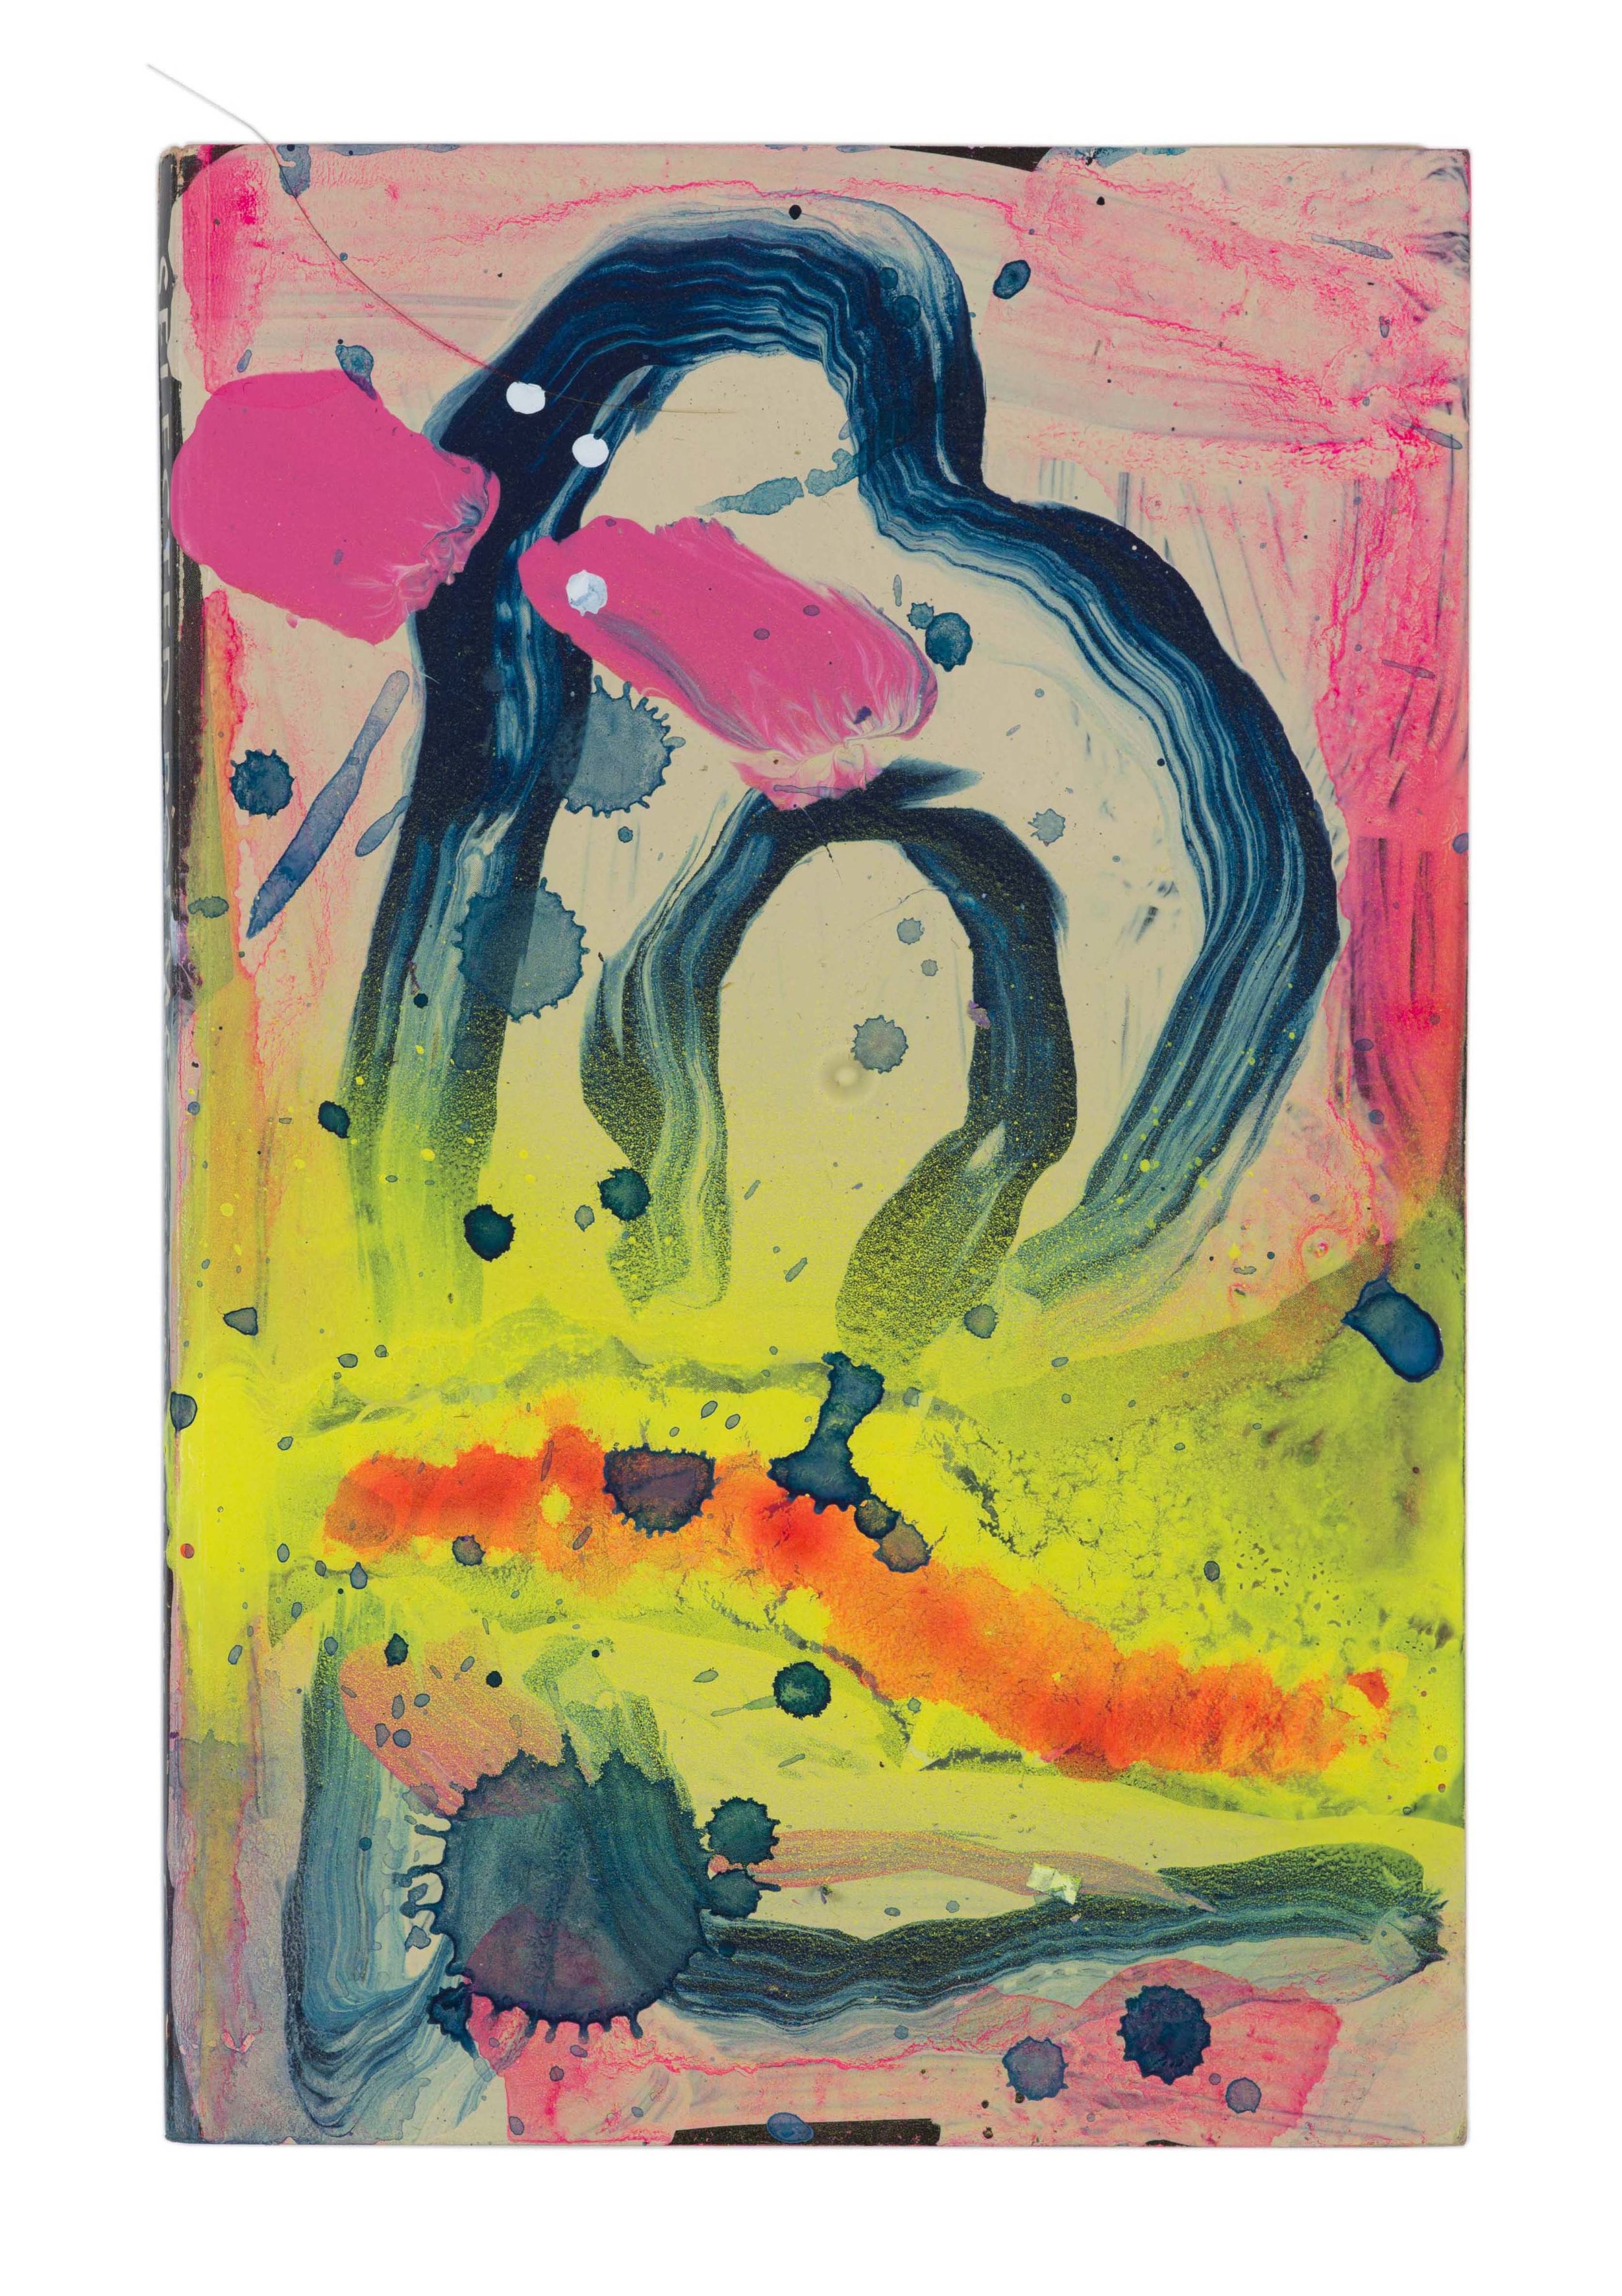  Drew Beattie and Ben Shepard  Oscar Williams: Selected Poems  acrylic and spray paint on used book 2016 8 ⅜ x 5 ½ inches 